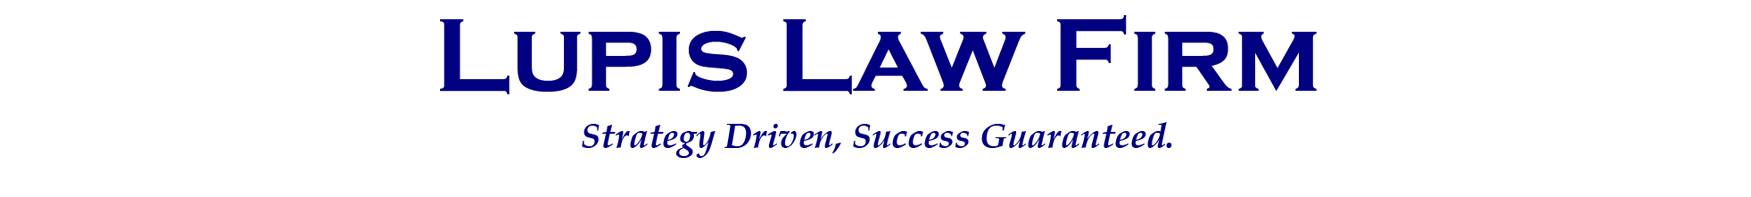 Lupis Law Firm